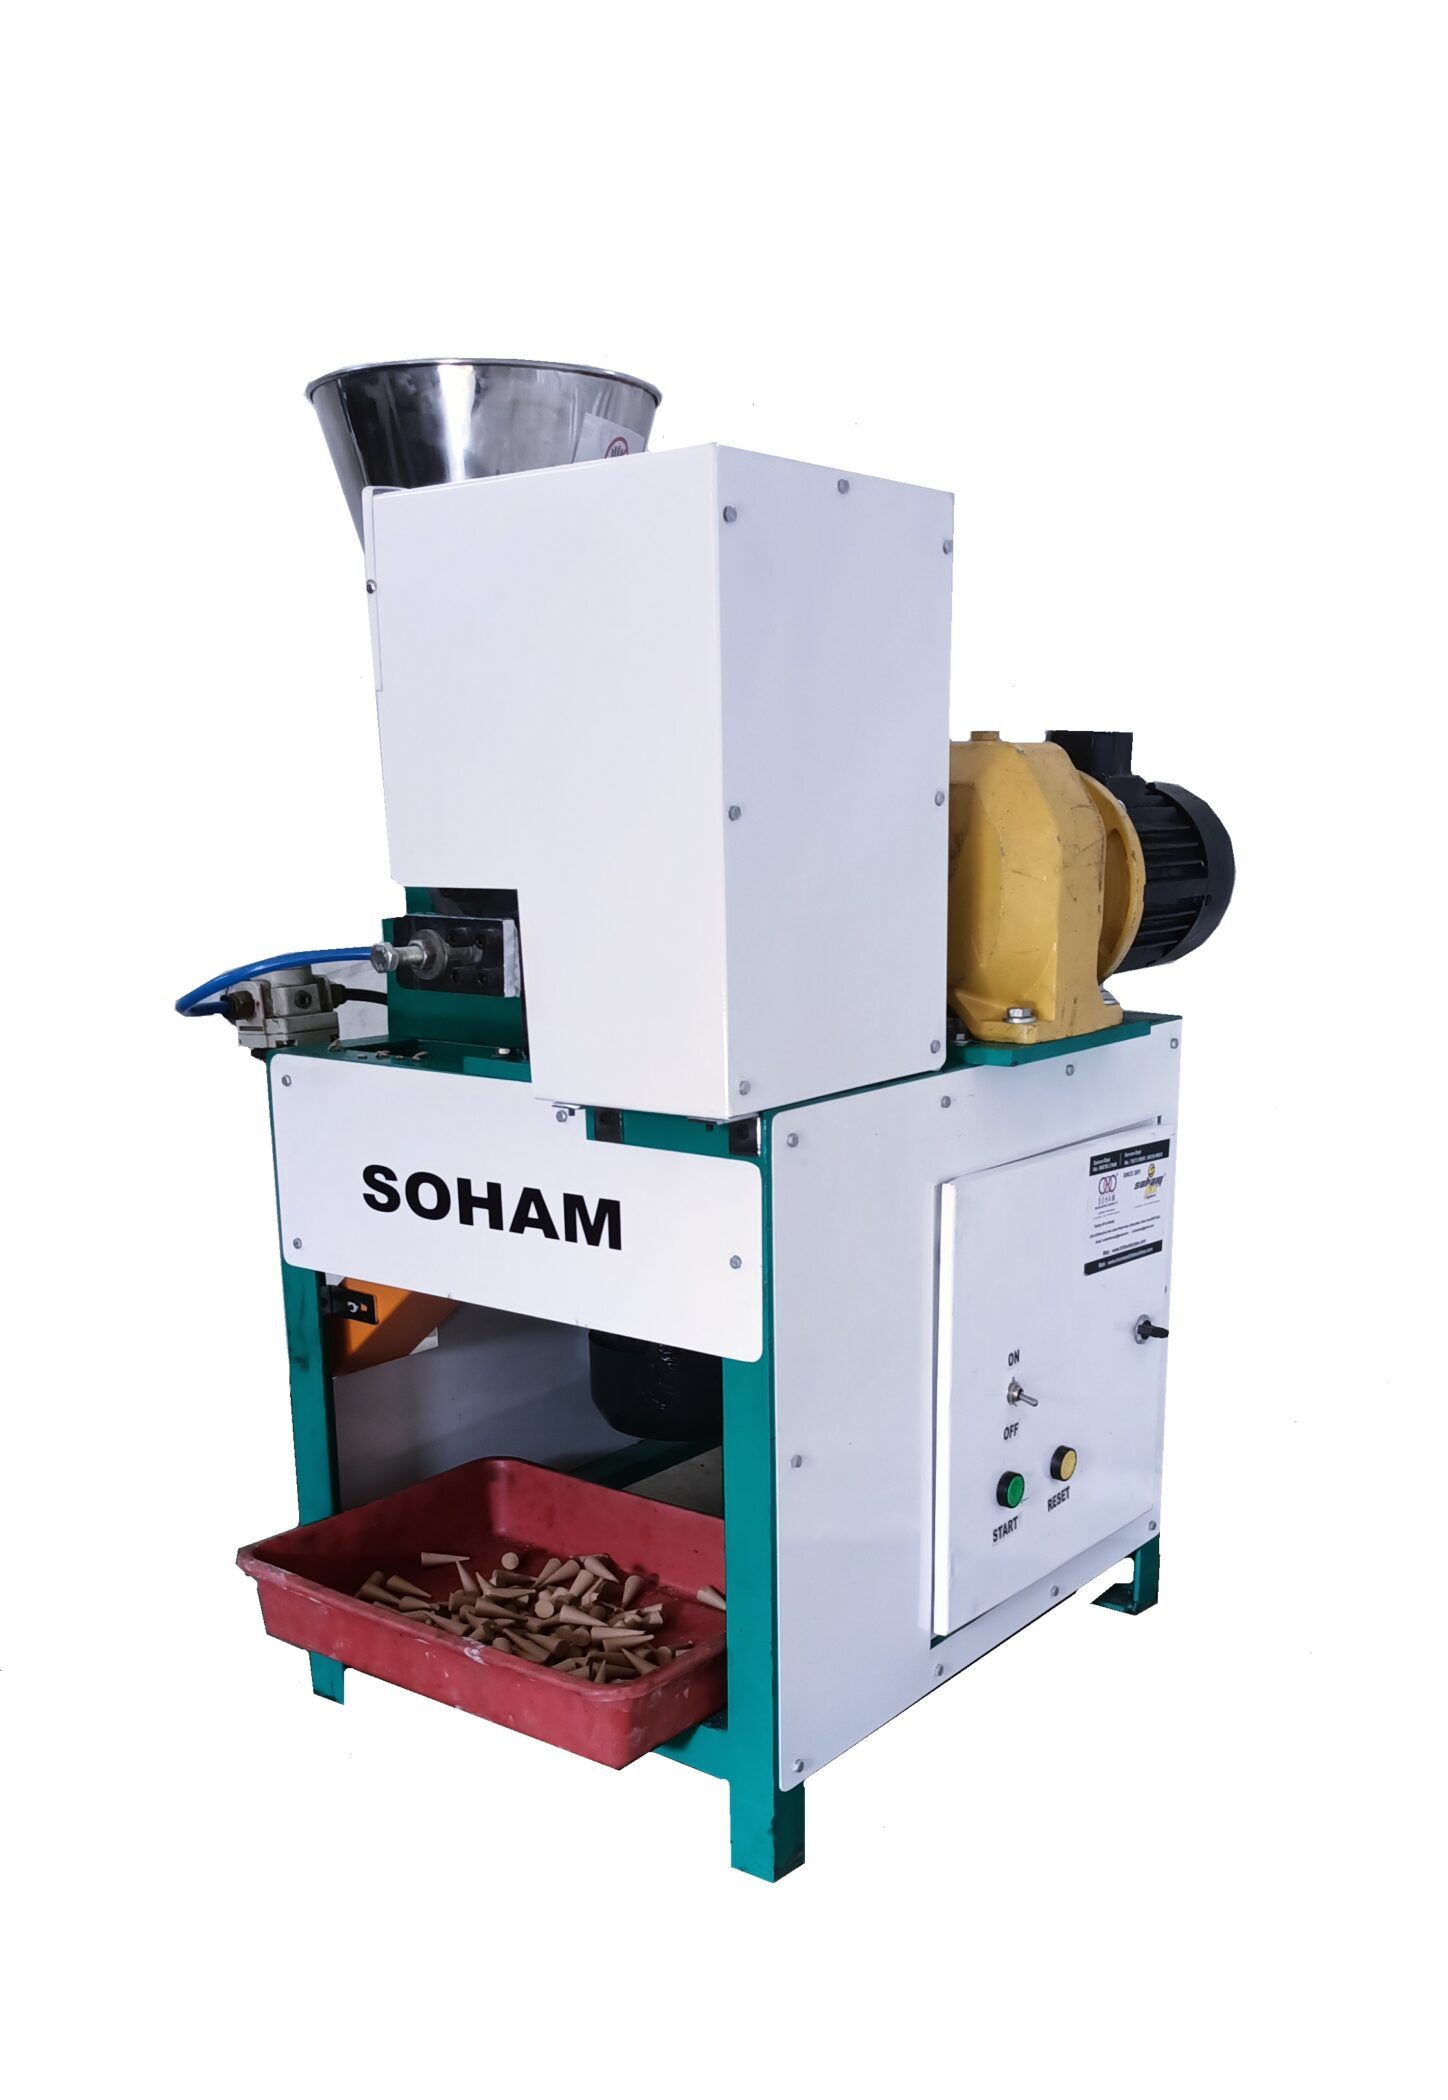 Primary requirement for Dhoop cone making machine Nano model